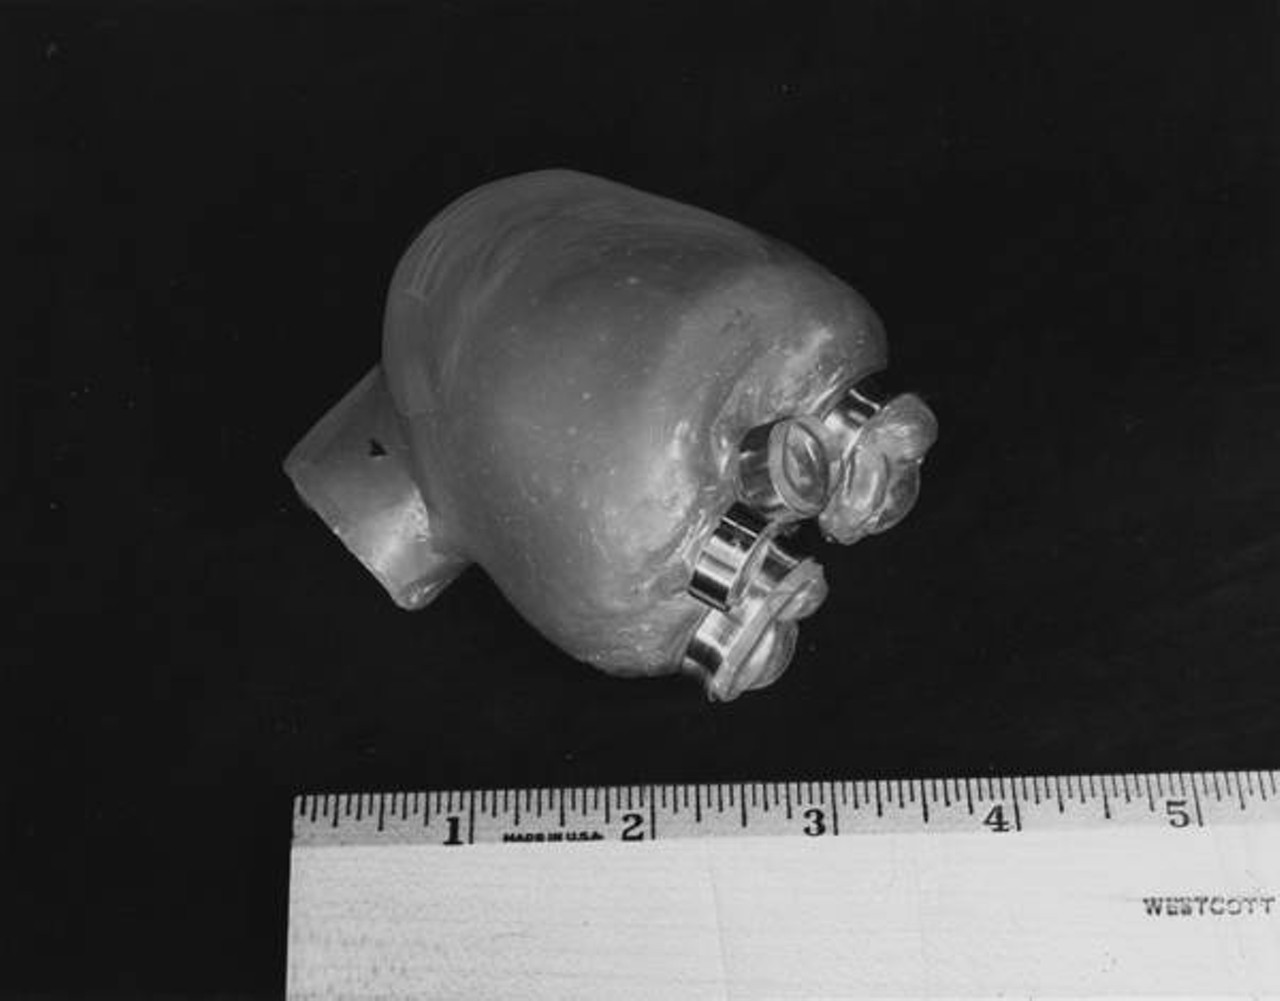  Artificial Heart Developed by the Cleveland Clinic, First to Ever be Implanted in an Animal, 1958 